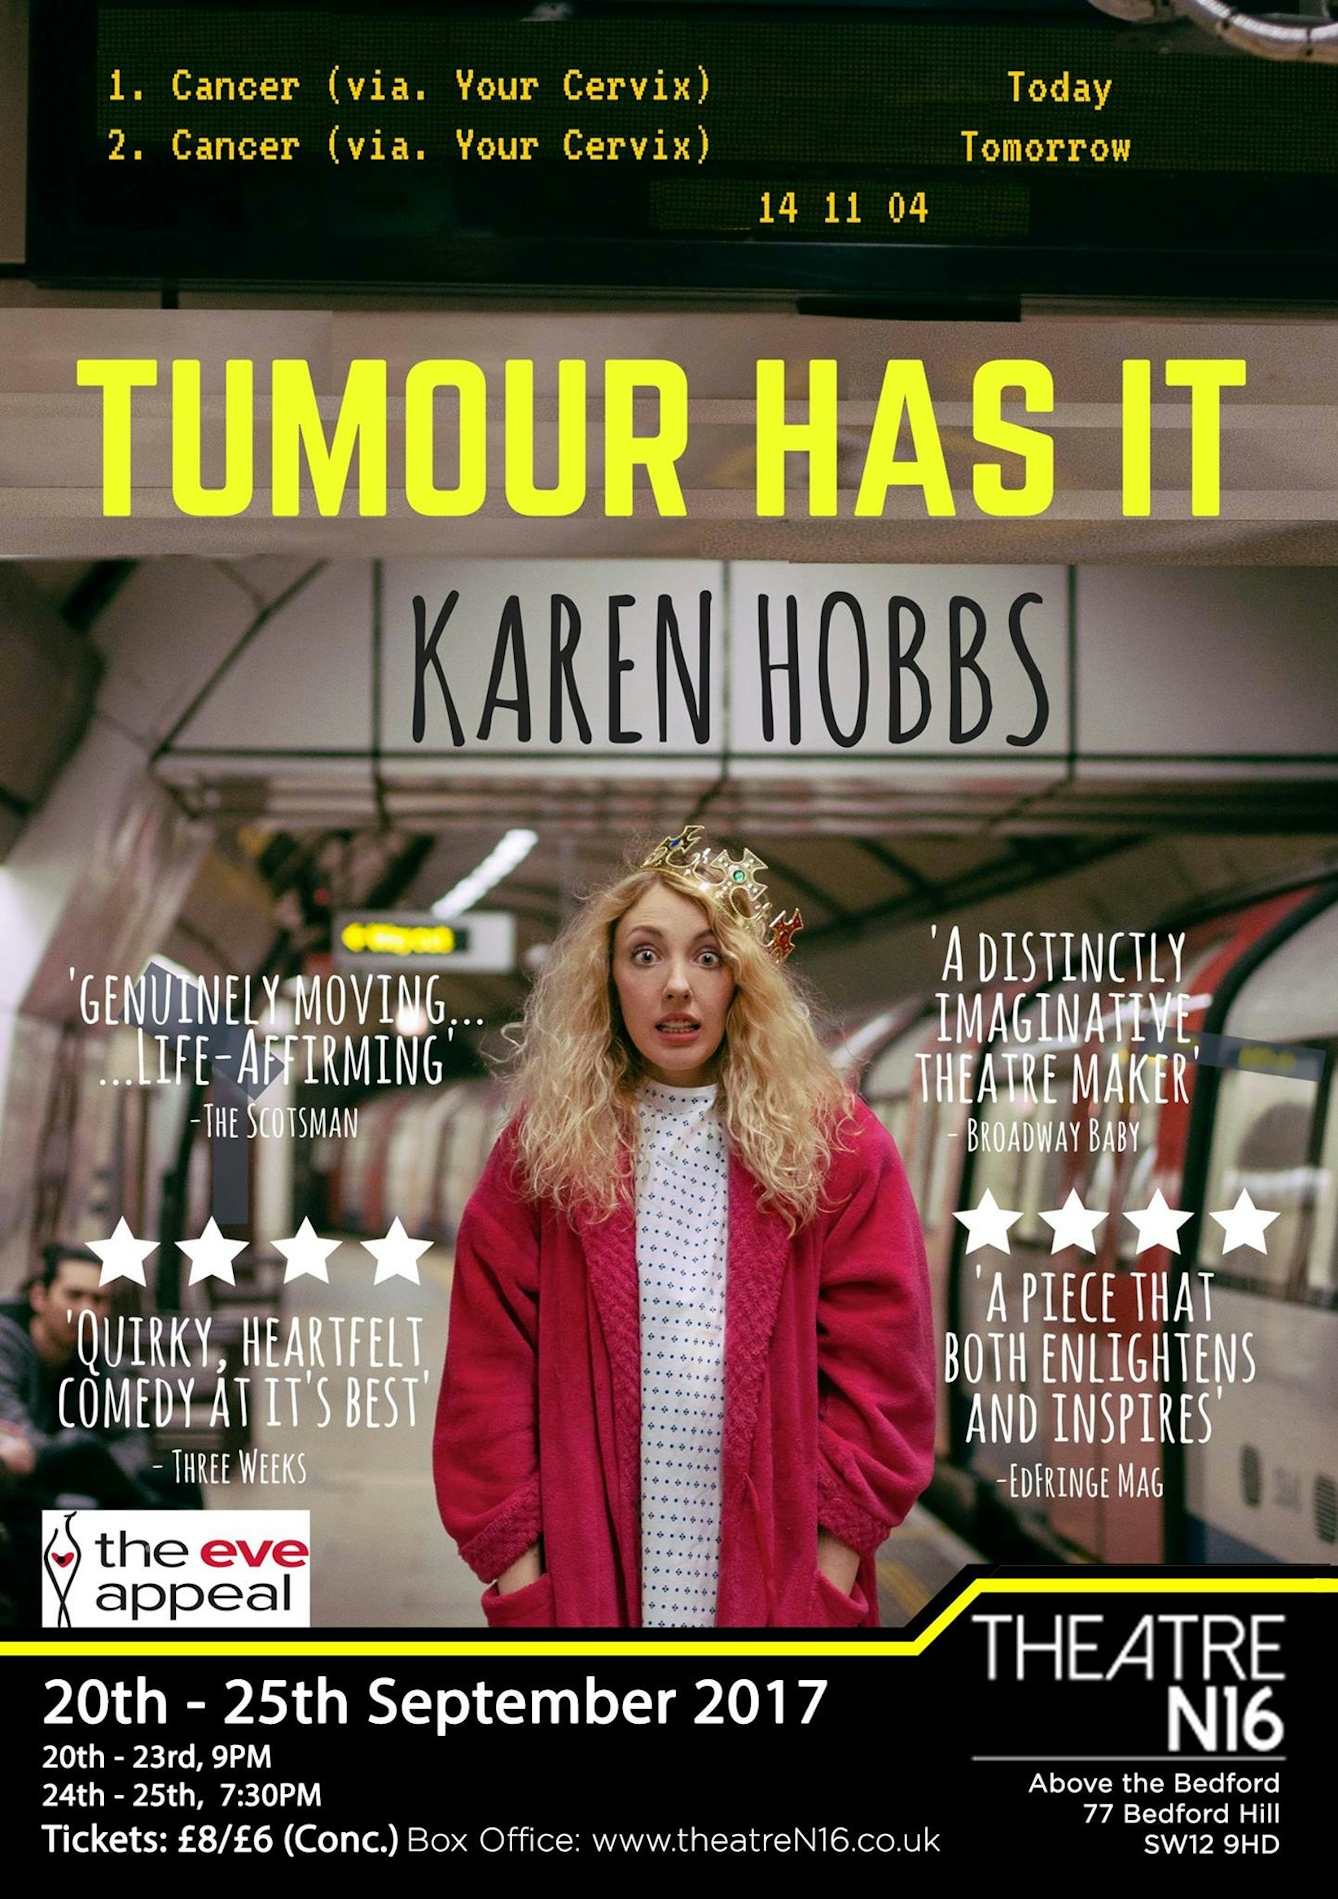 Poster for the show ‘Tumour Has It’ by Karen Hobbs.